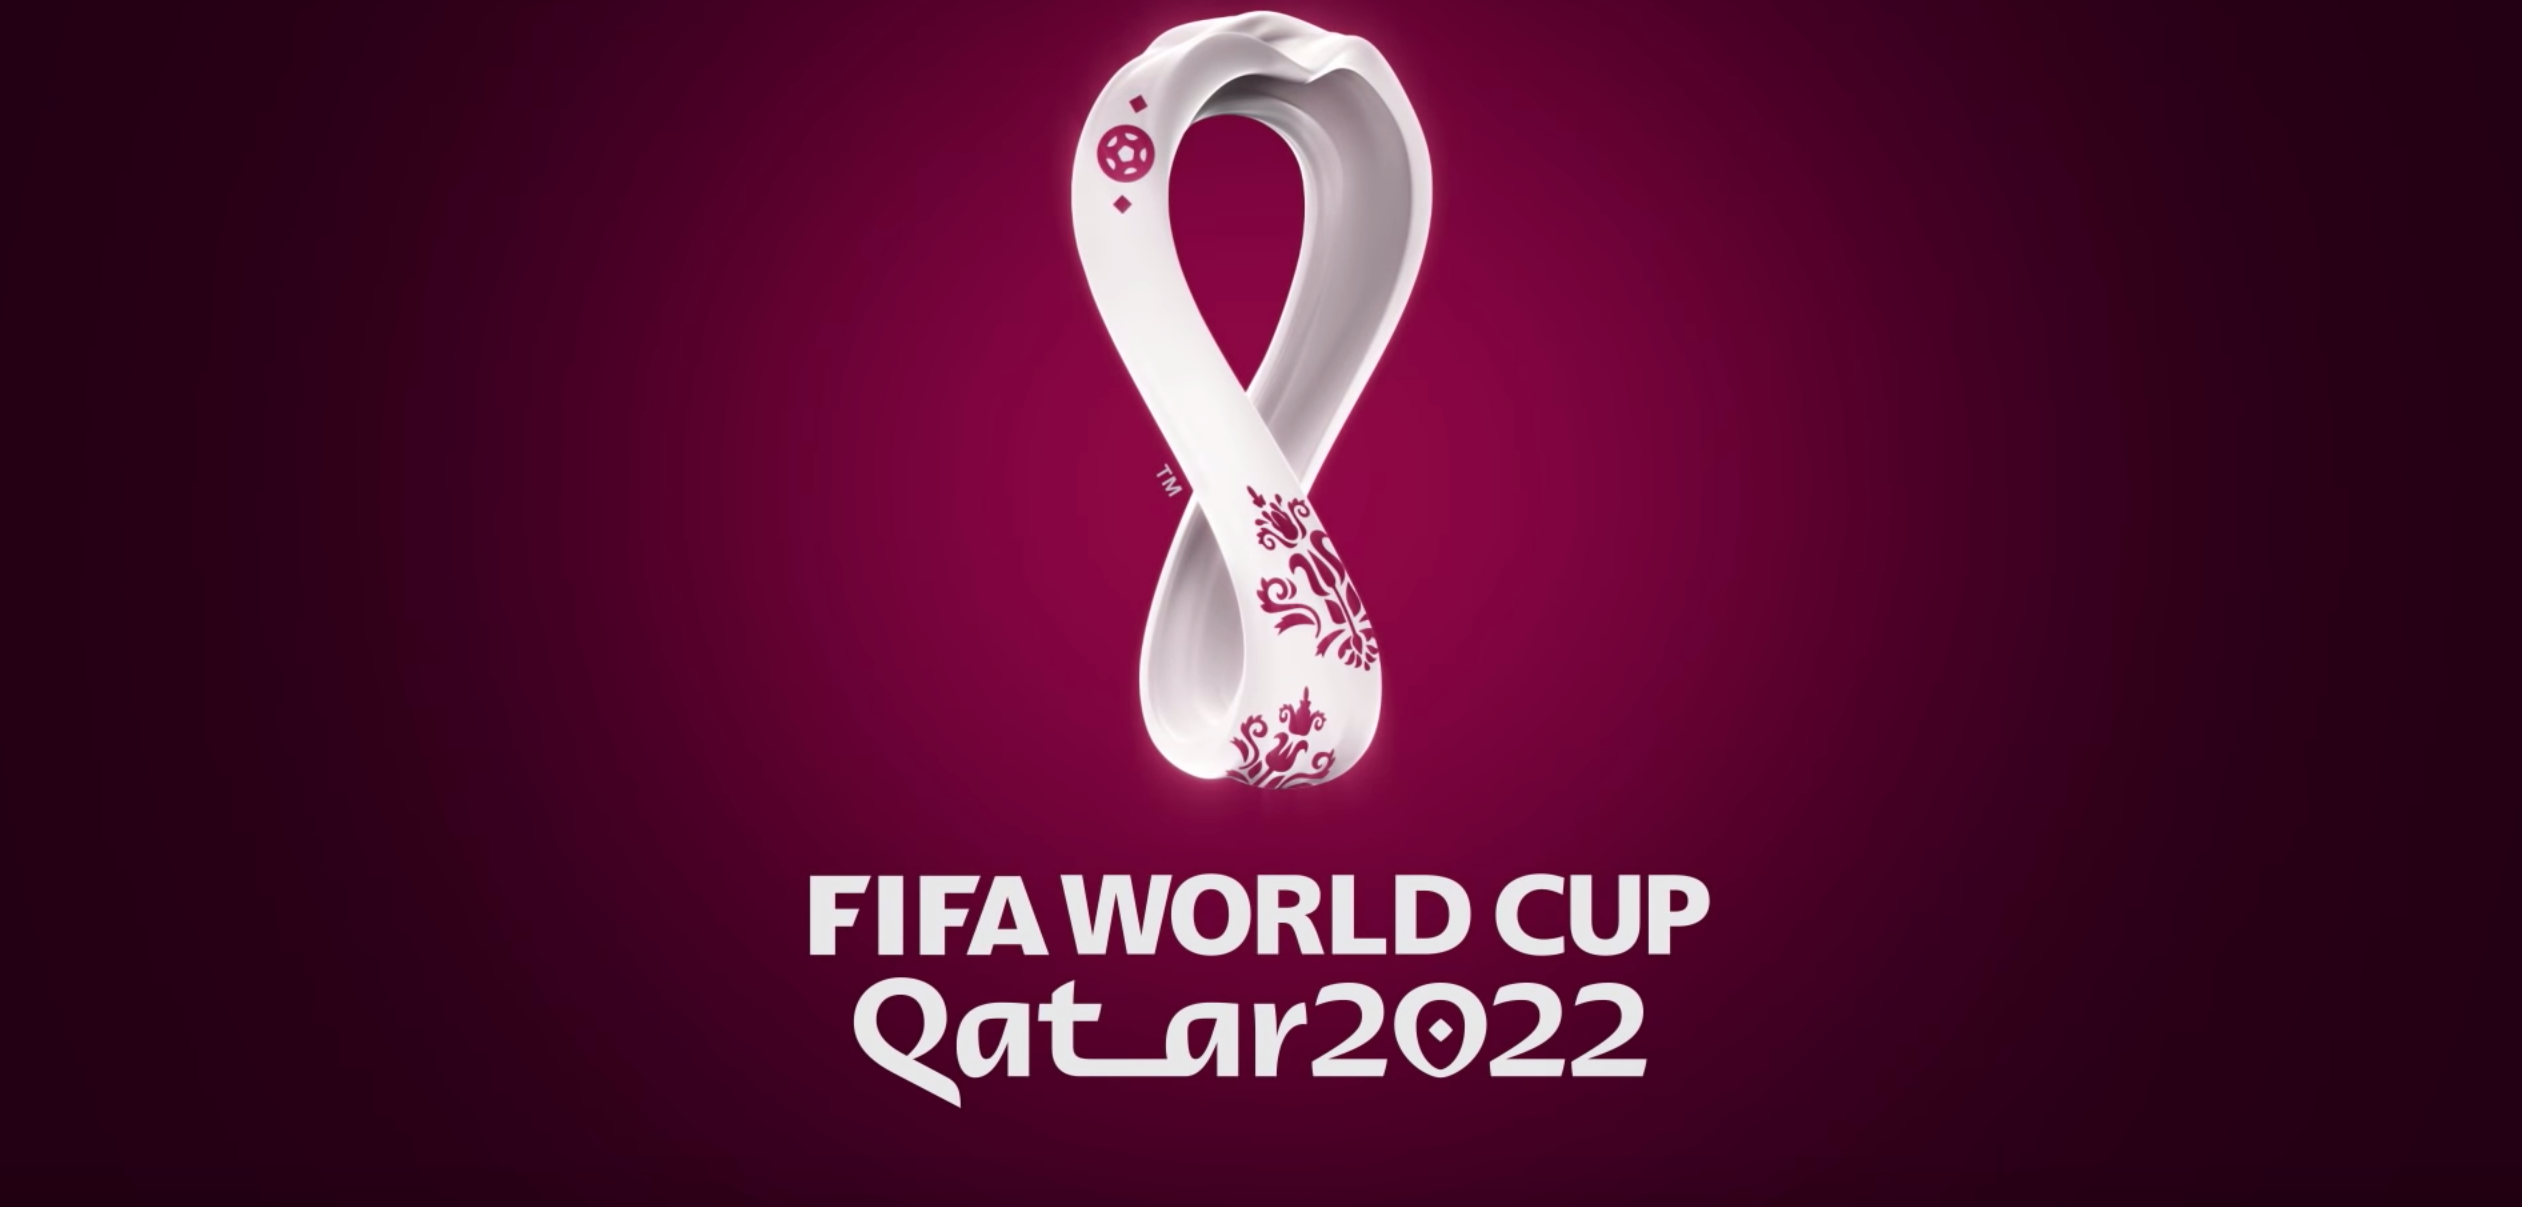 Vivo, Dangbei Becomes Official Sponsor of FIFA World Cup Qatar 2022